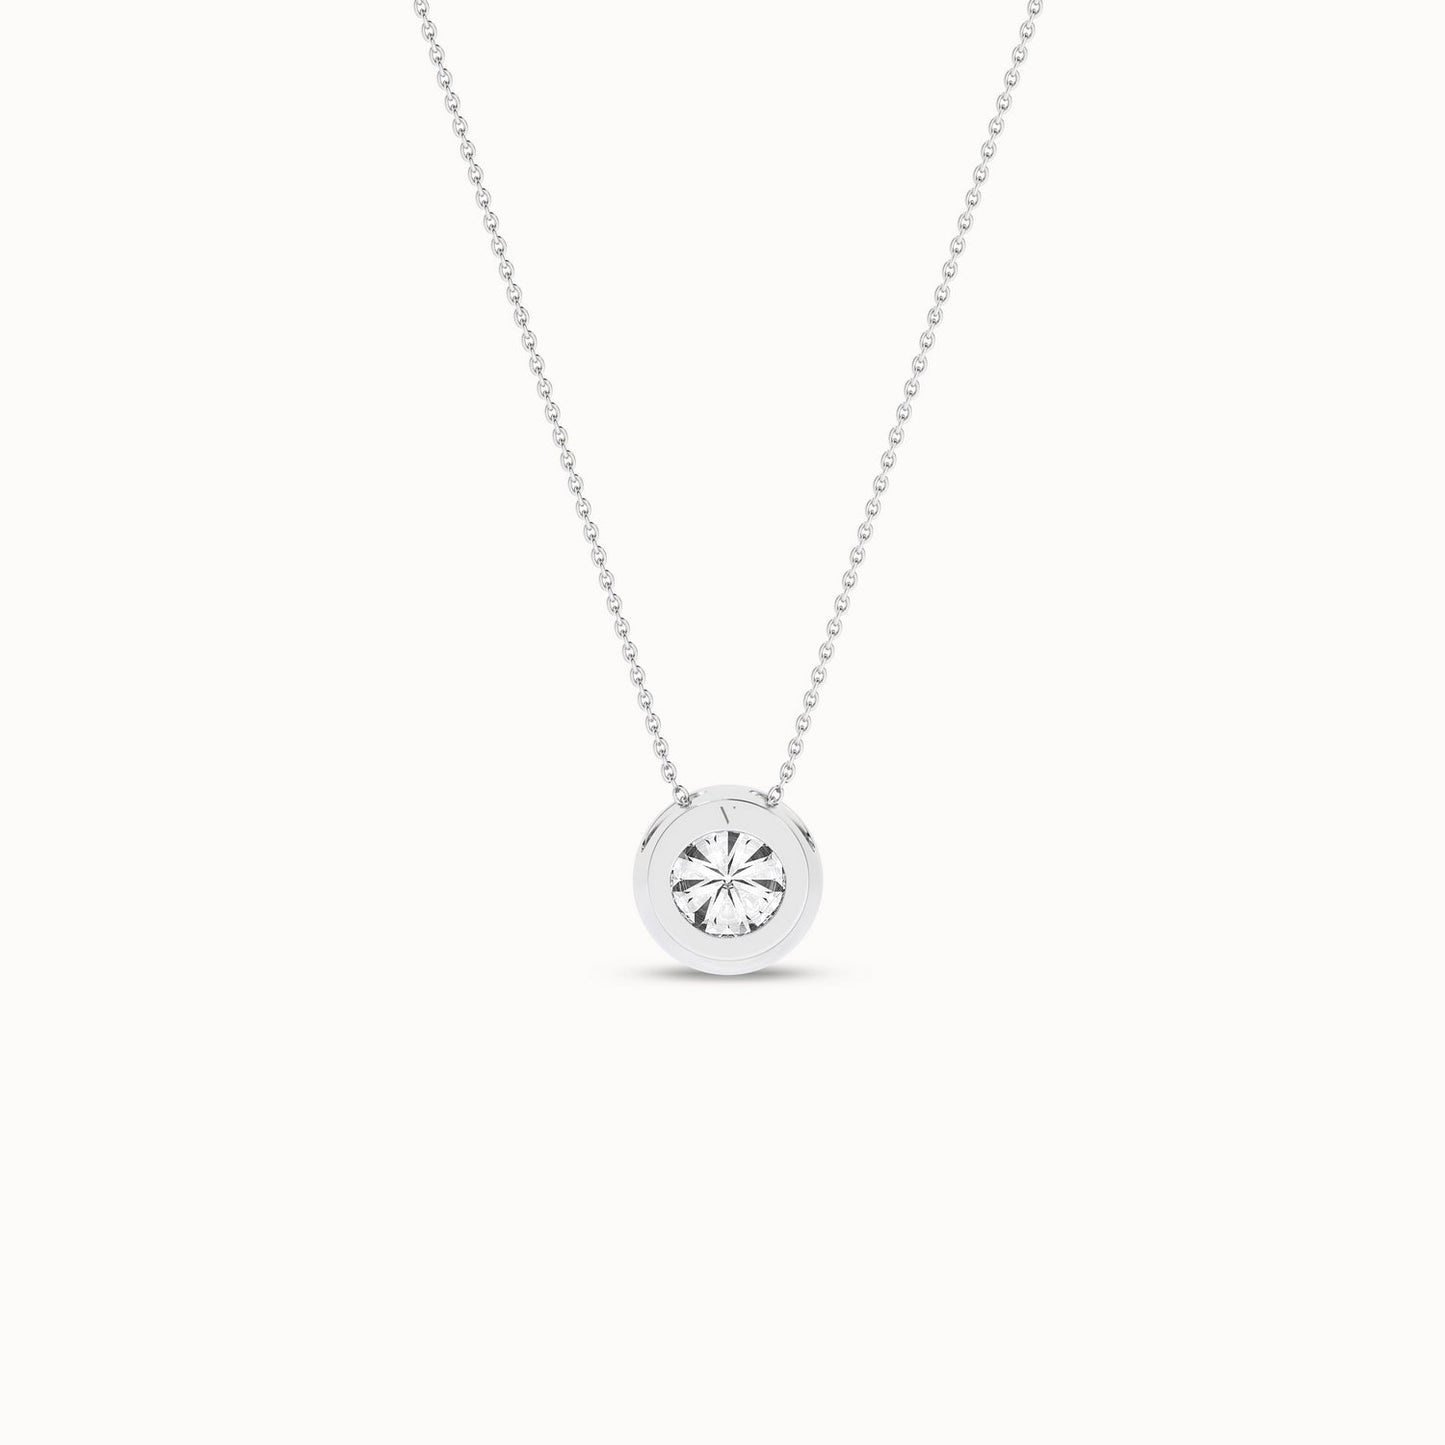 Encompassing Round Necklace_Product Angle_1/2Ct. - 1